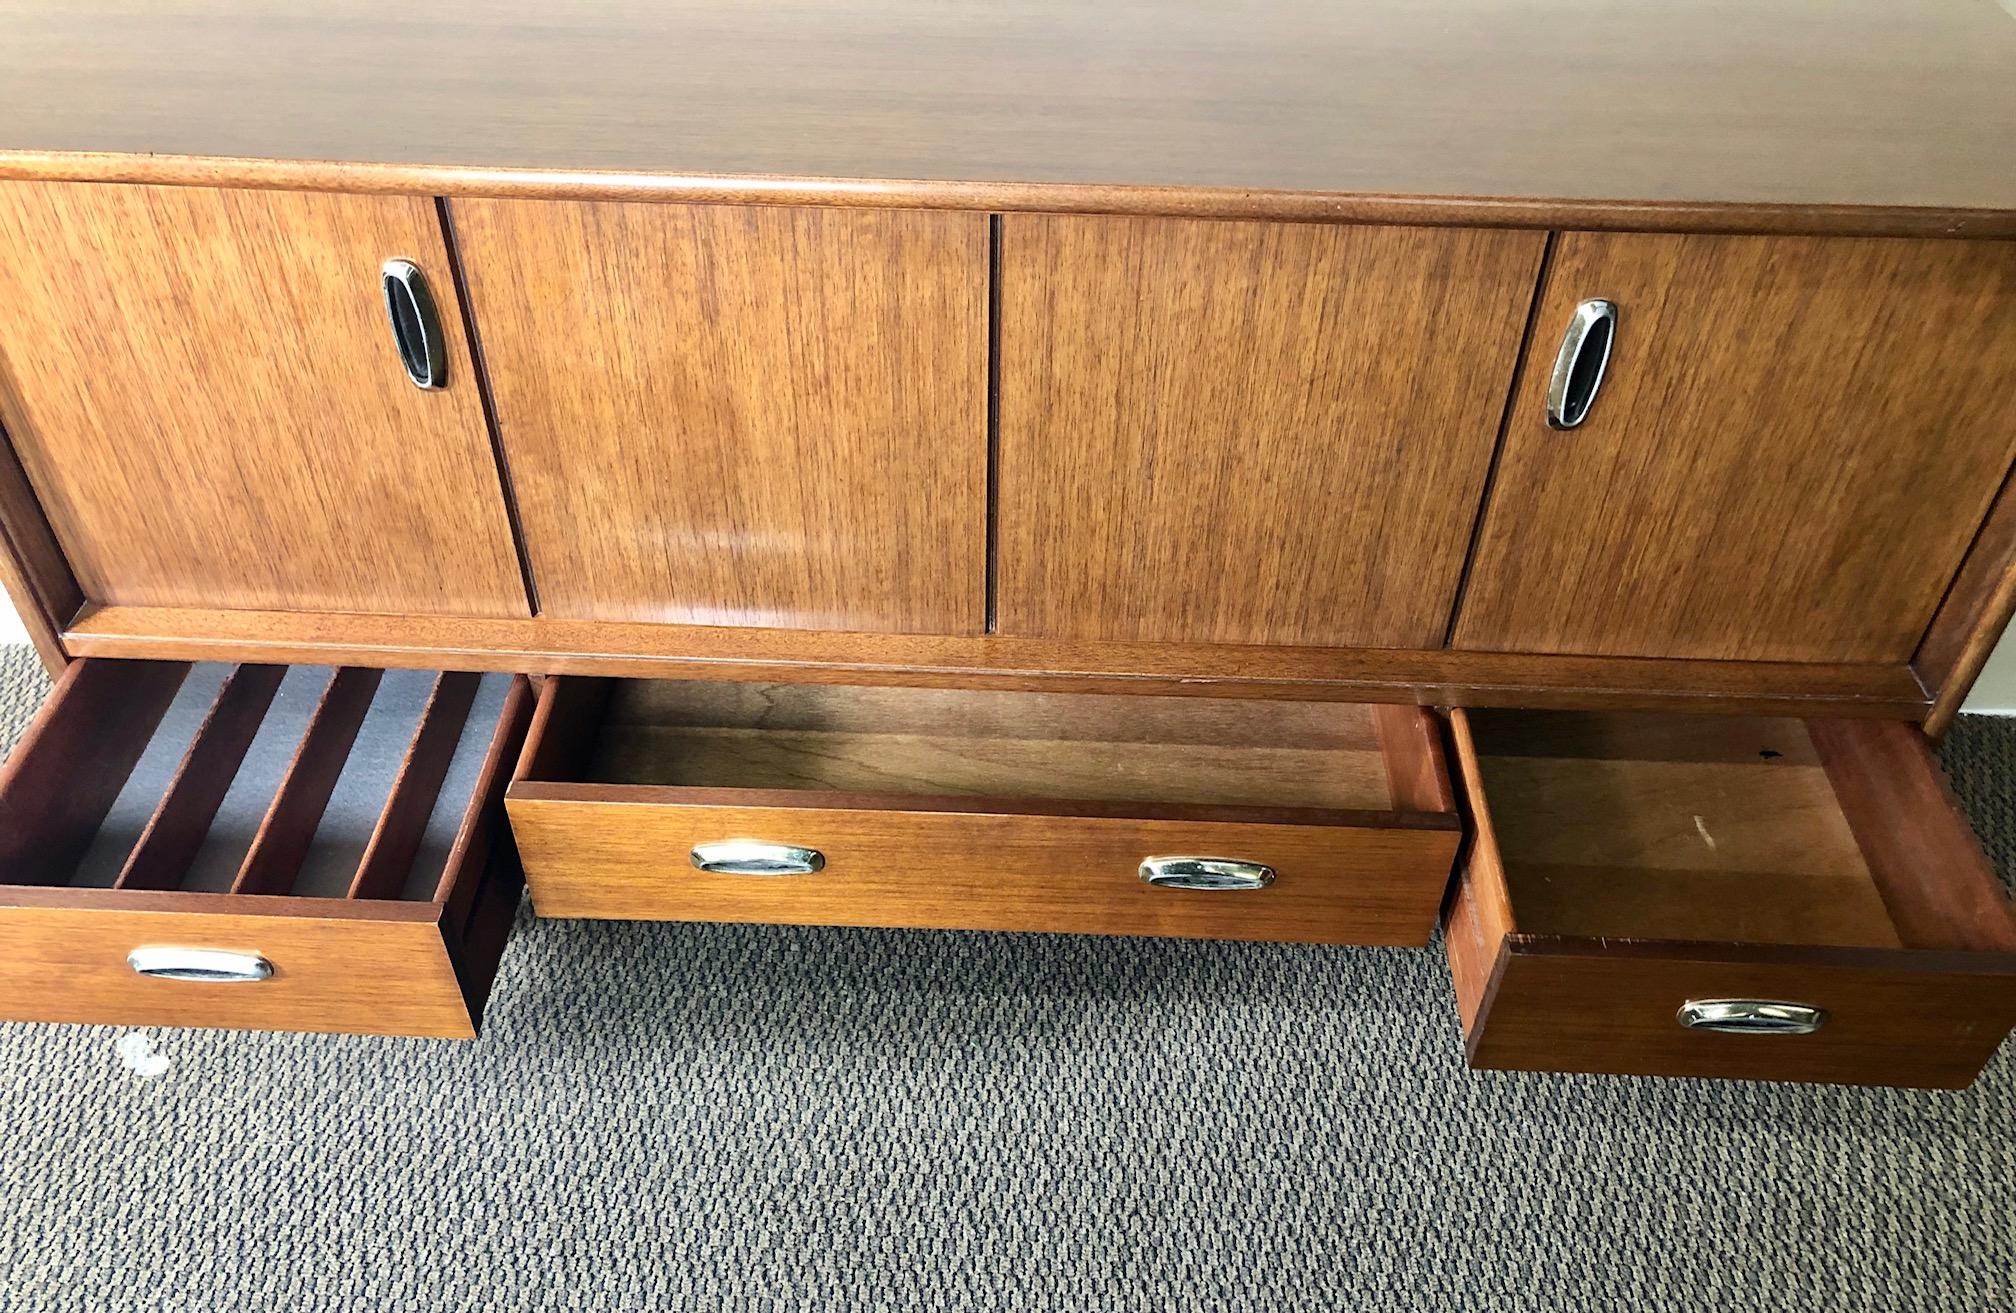 Midcentury Mahogany Credenza Sideboard with Metal Pulls by G Plan In Good Condition For Sale In Norcross, GA